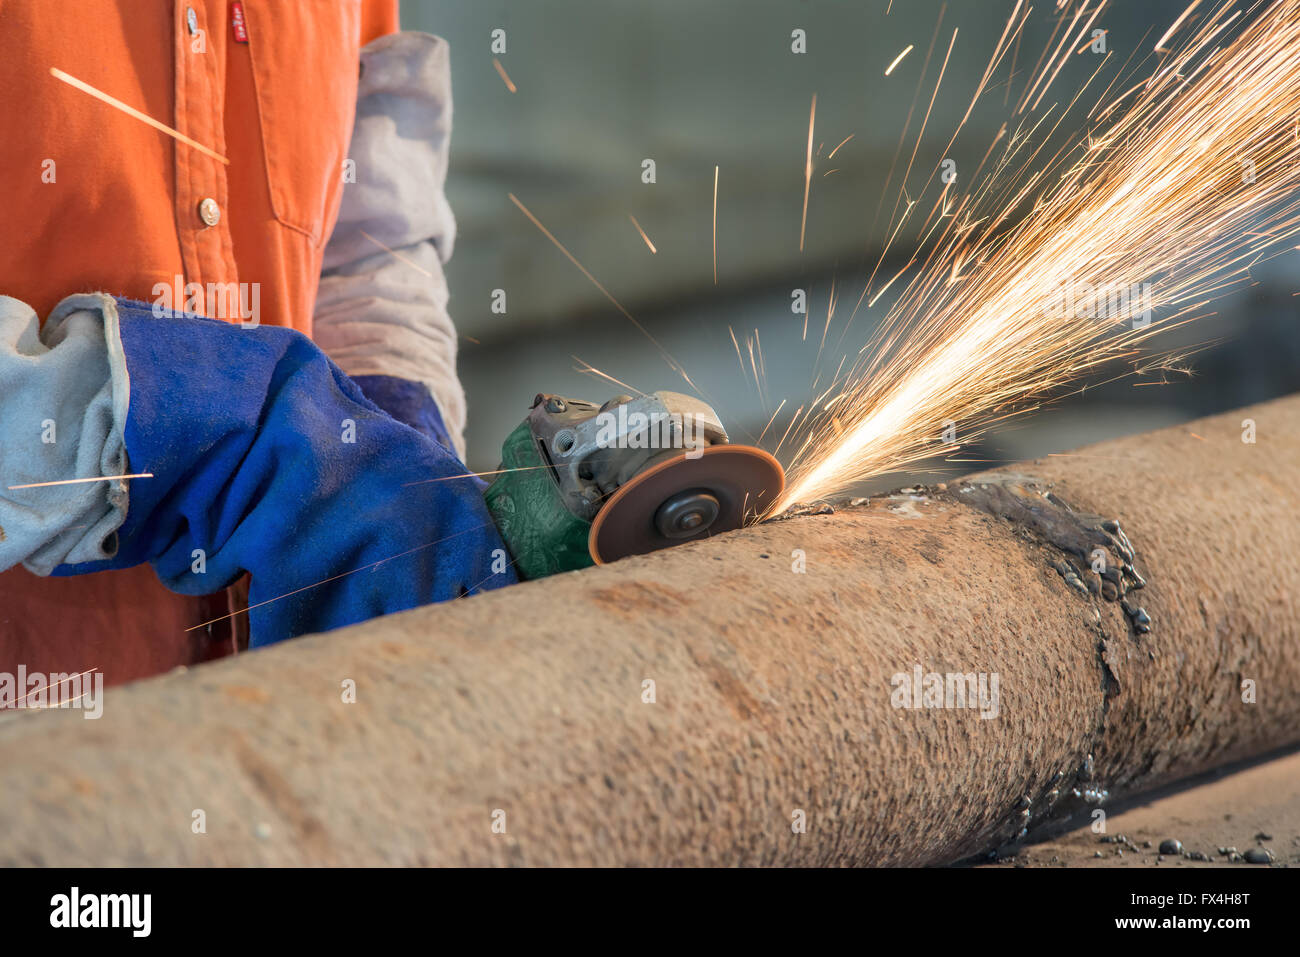 Industrial worker cutting and welding metal with many sharp sparks Stock Photo